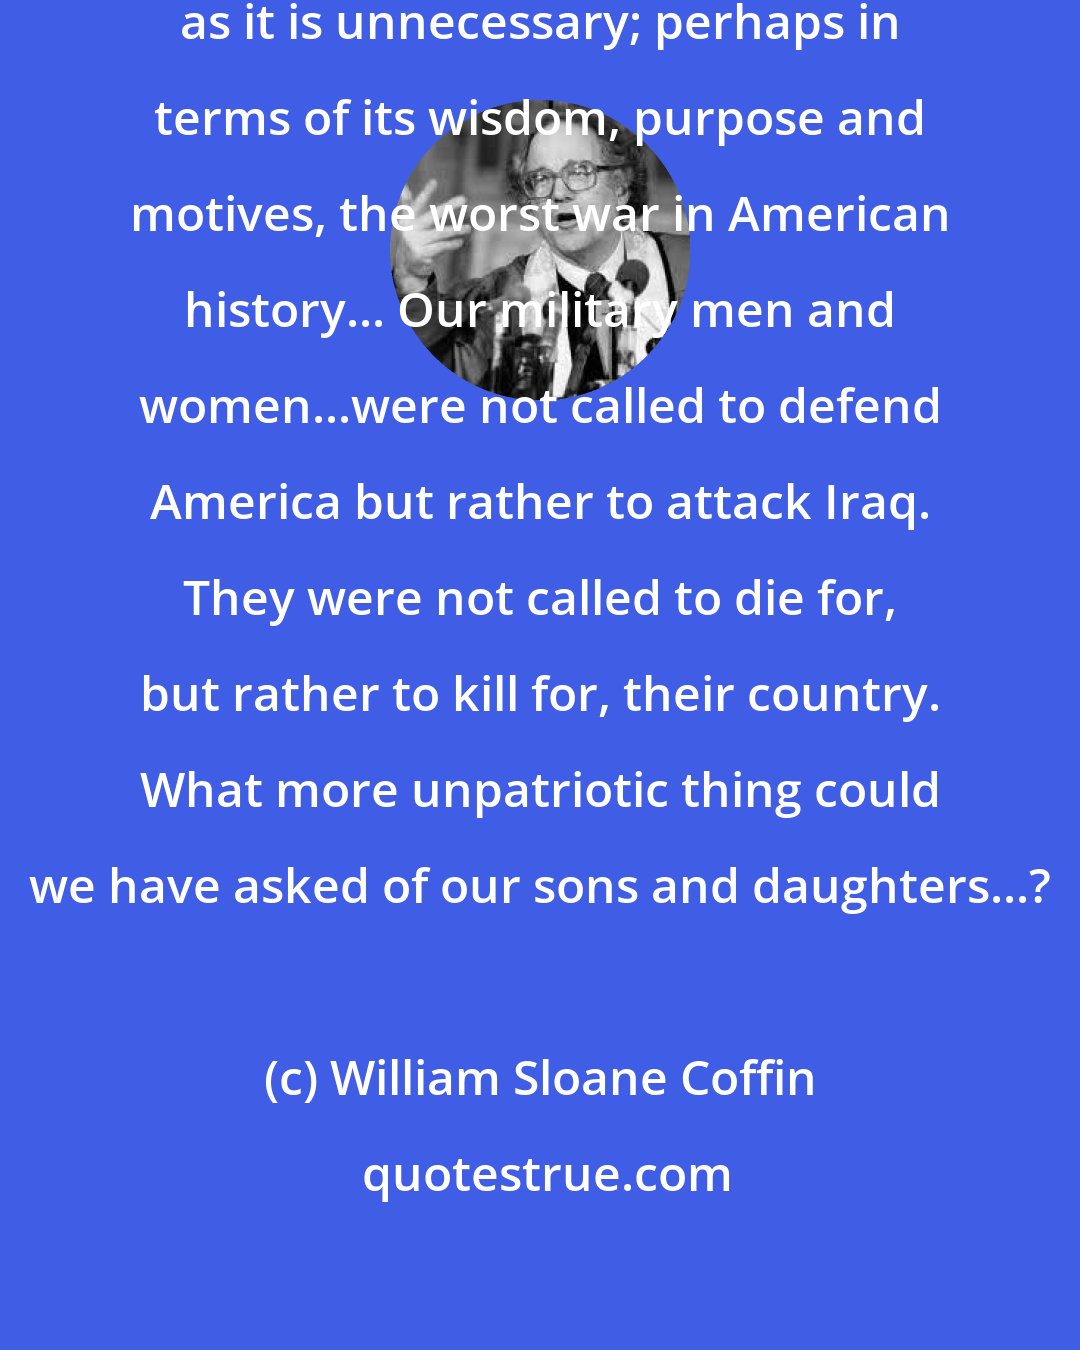 William Sloane Coffin: The war against Iraq is as disastrous as it is unnecessary; perhaps in terms of its wisdom, purpose and motives, the worst war in American history... Our military men and women...were not called to defend America but rather to attack Iraq. They were not called to die for, but rather to kill for, their country. What more unpatriotic thing could we have asked of our sons and daughters...?